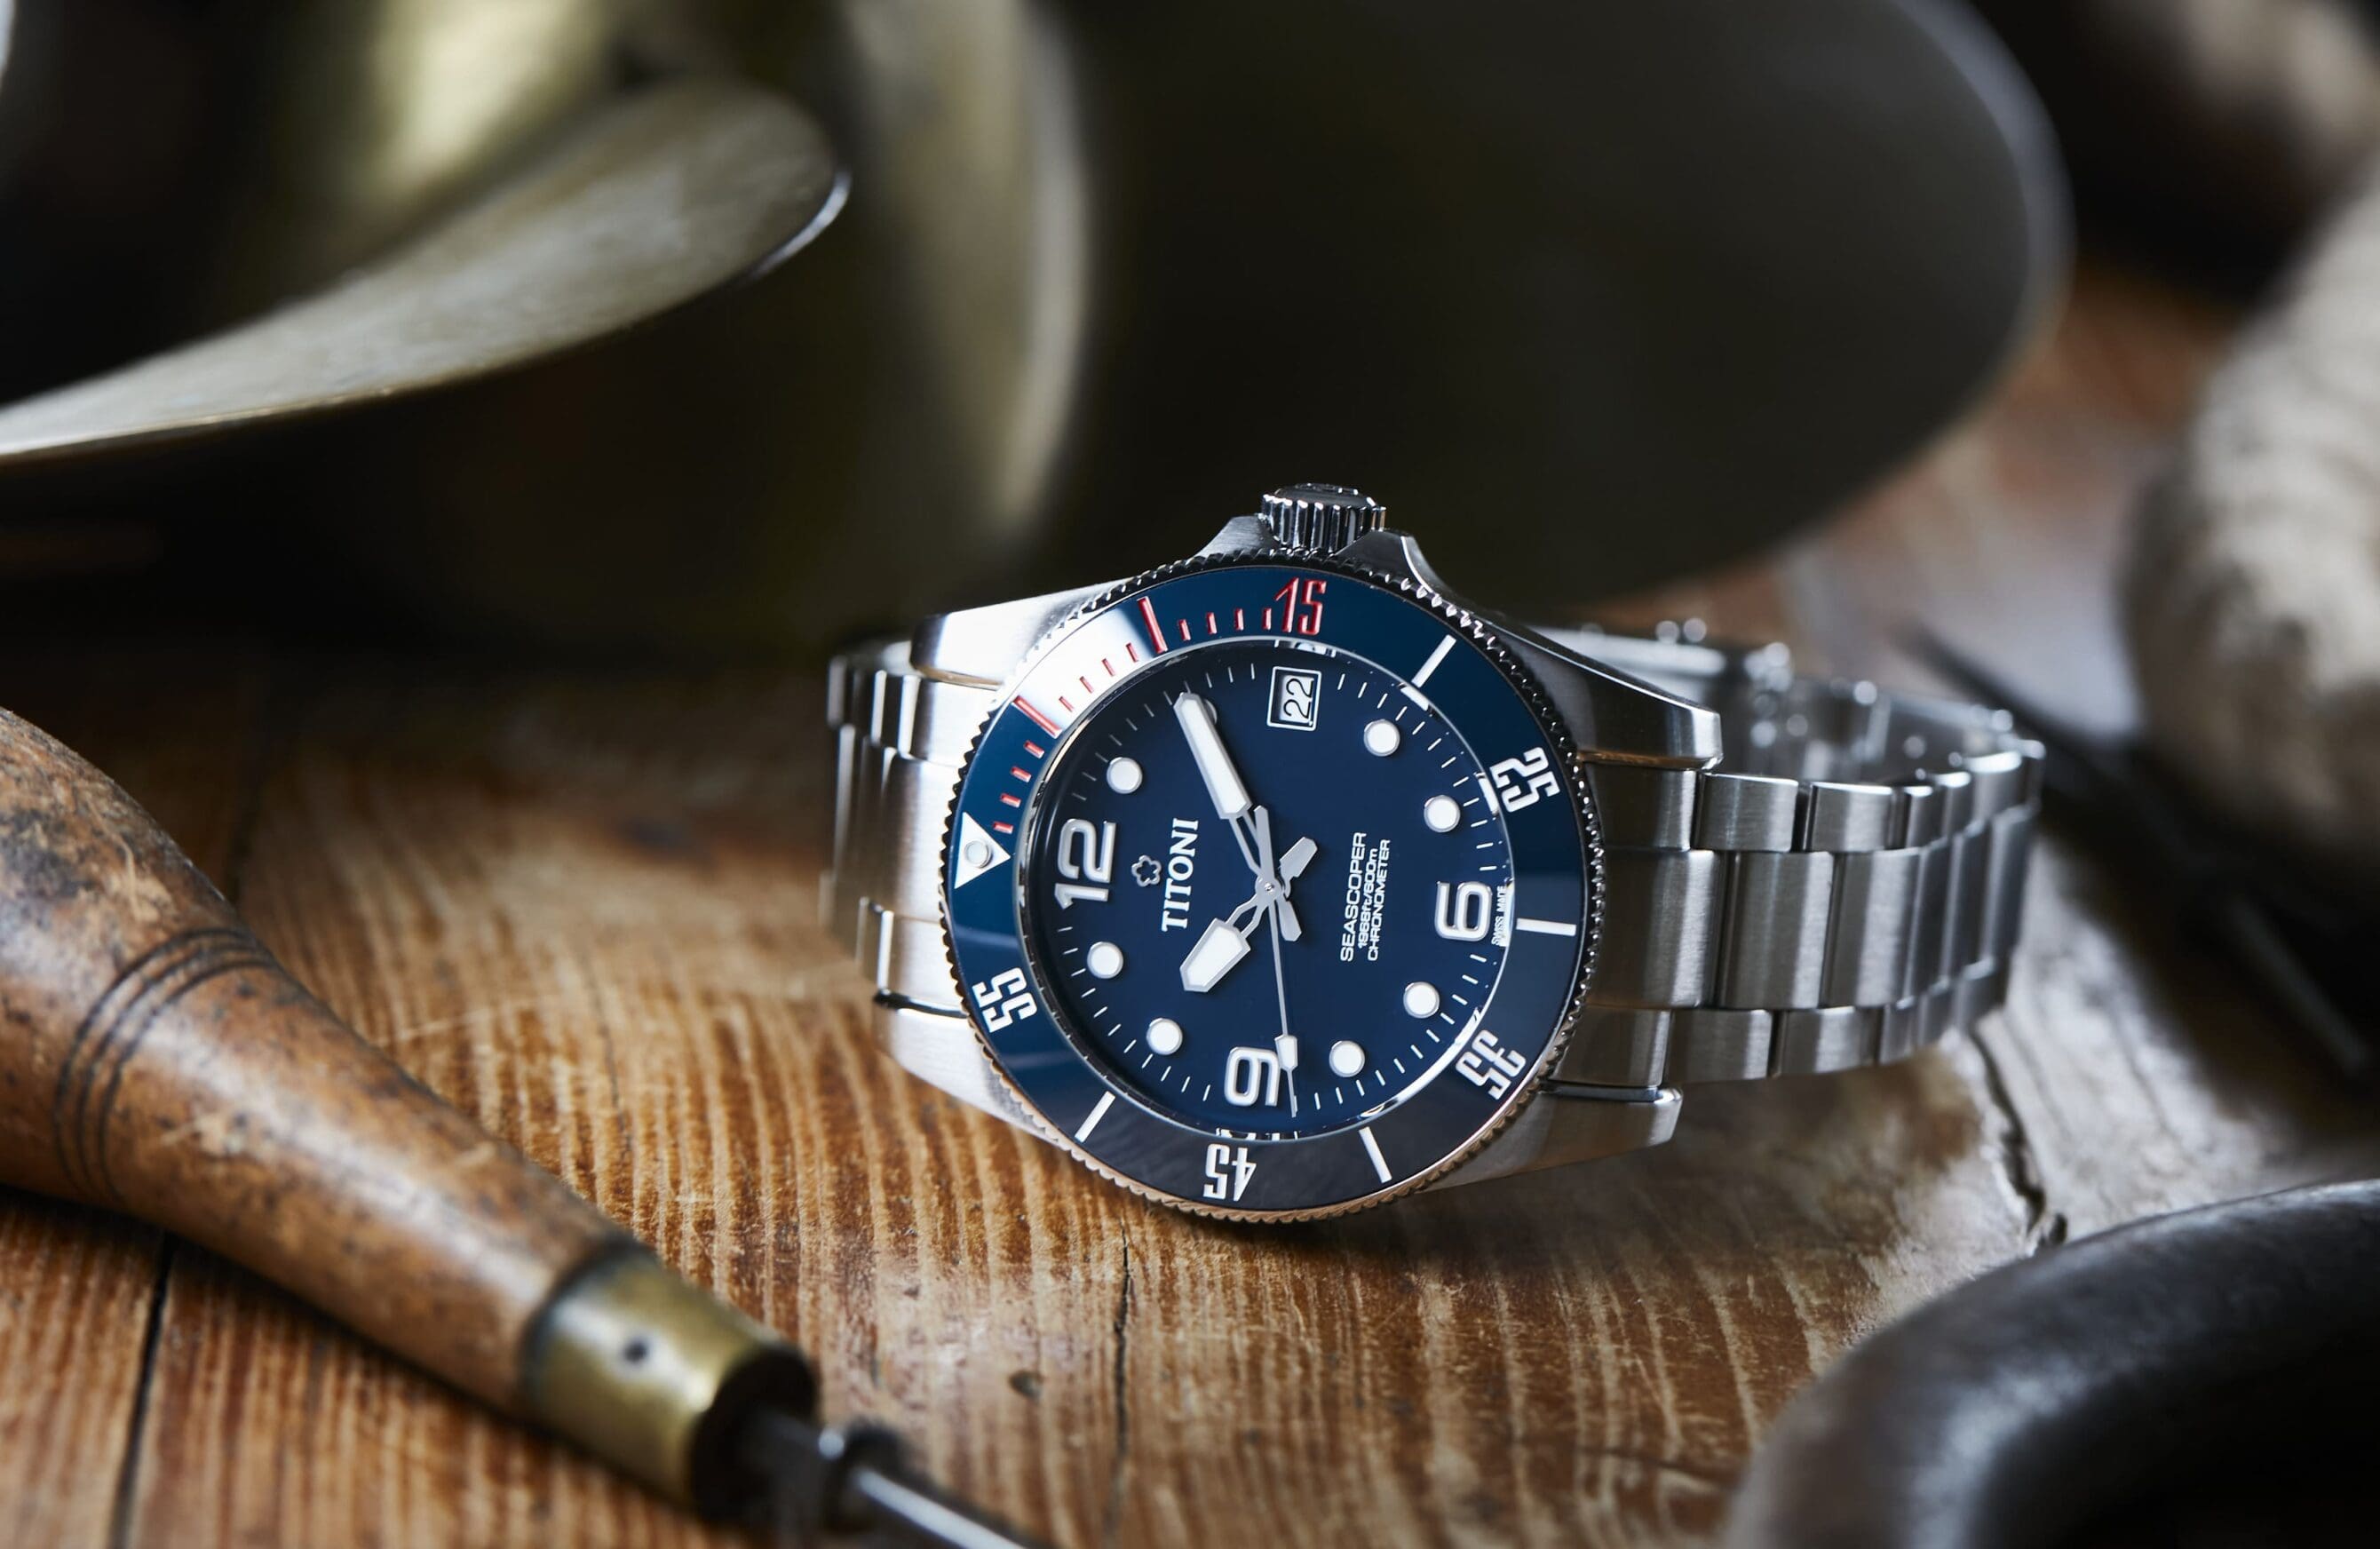 IN-DEPTH: The Titoni Seascoper 600 is a dive watch from a brand you should know more about